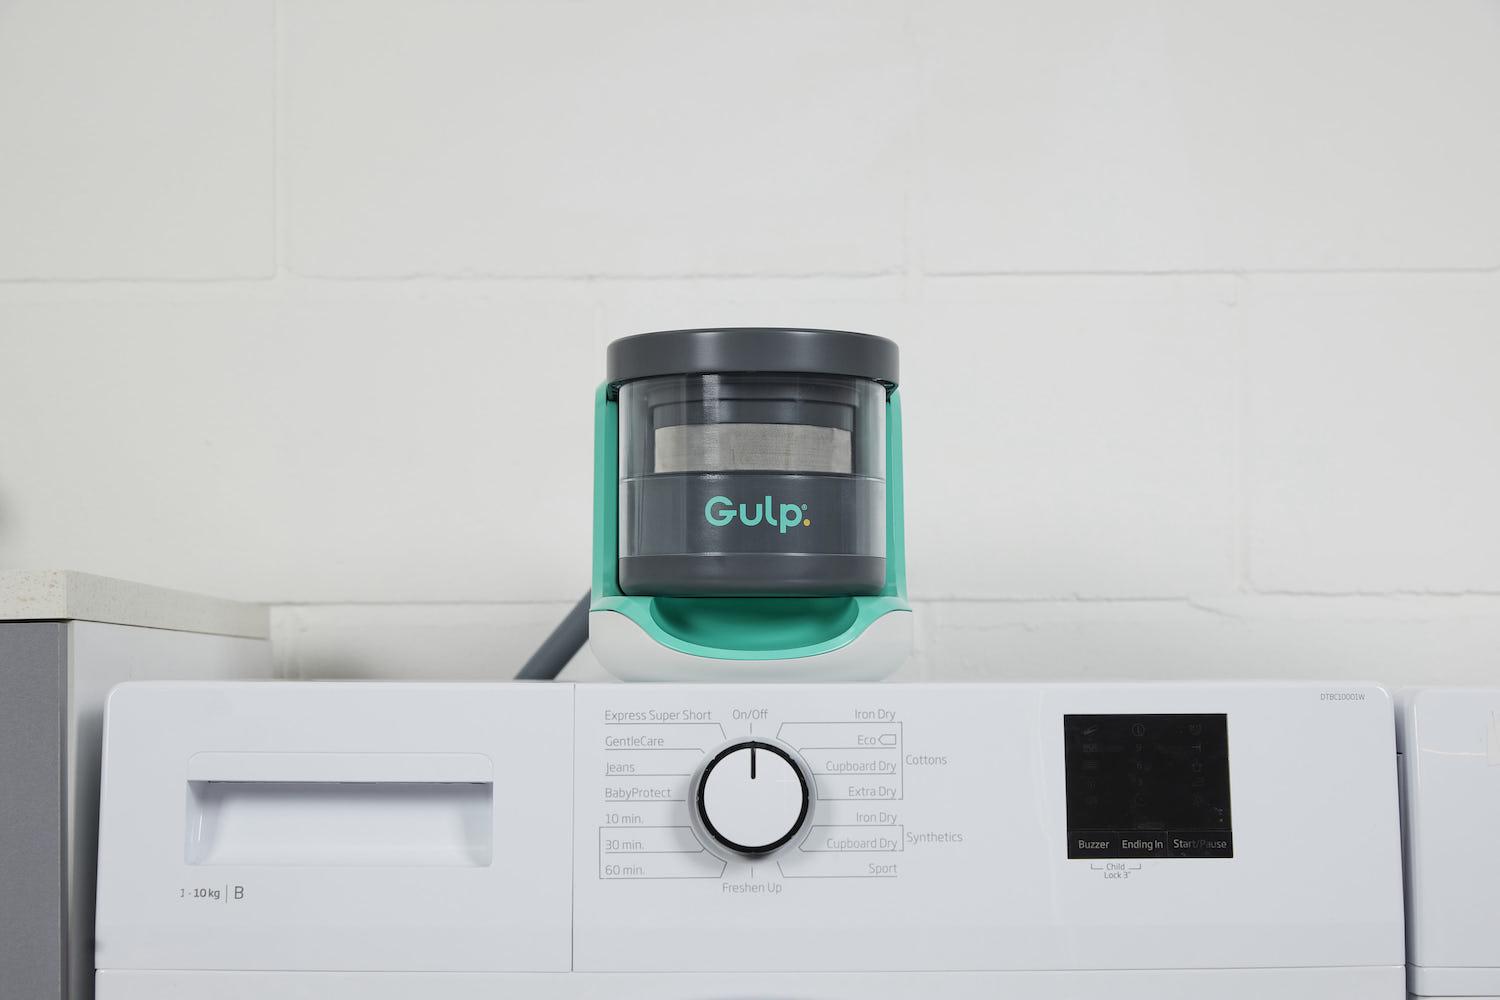 The Gulp microfiber filter sits on top of a washing machine —  this device captures Microplastic Particles